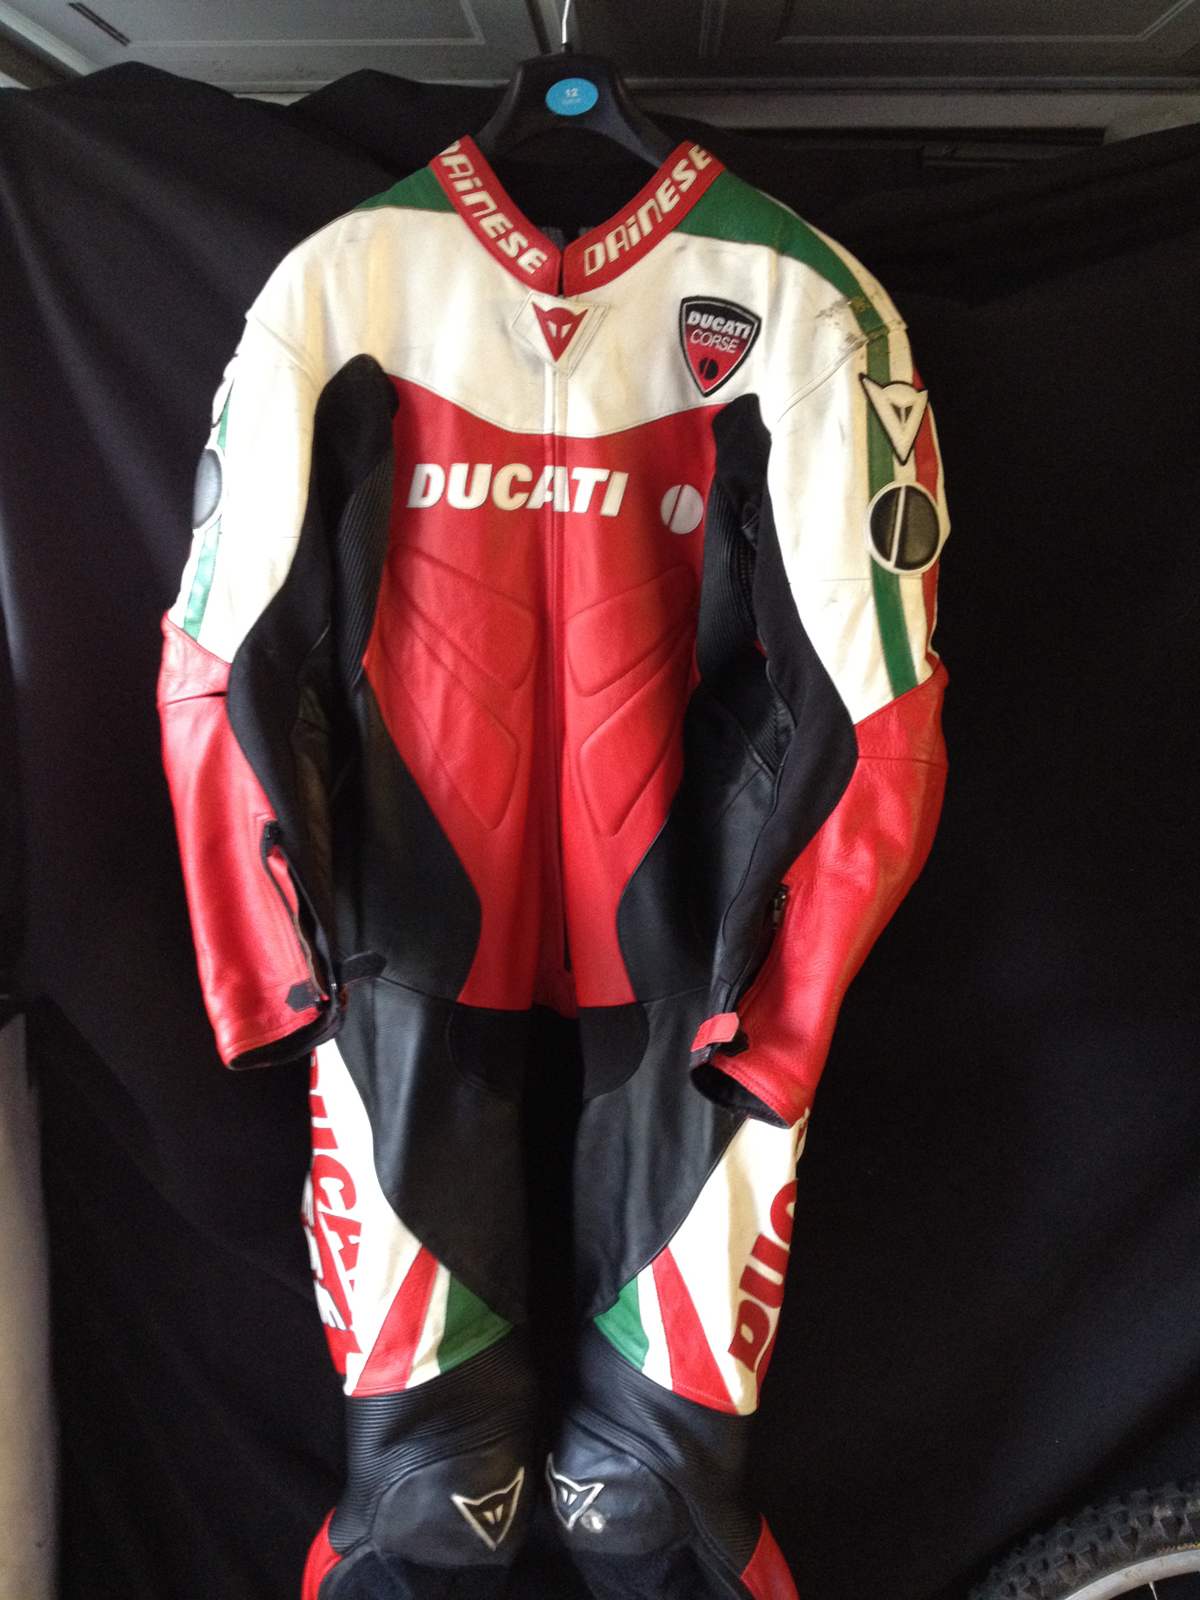 Dianese Zippers   - The Ultimate Ducati Forum